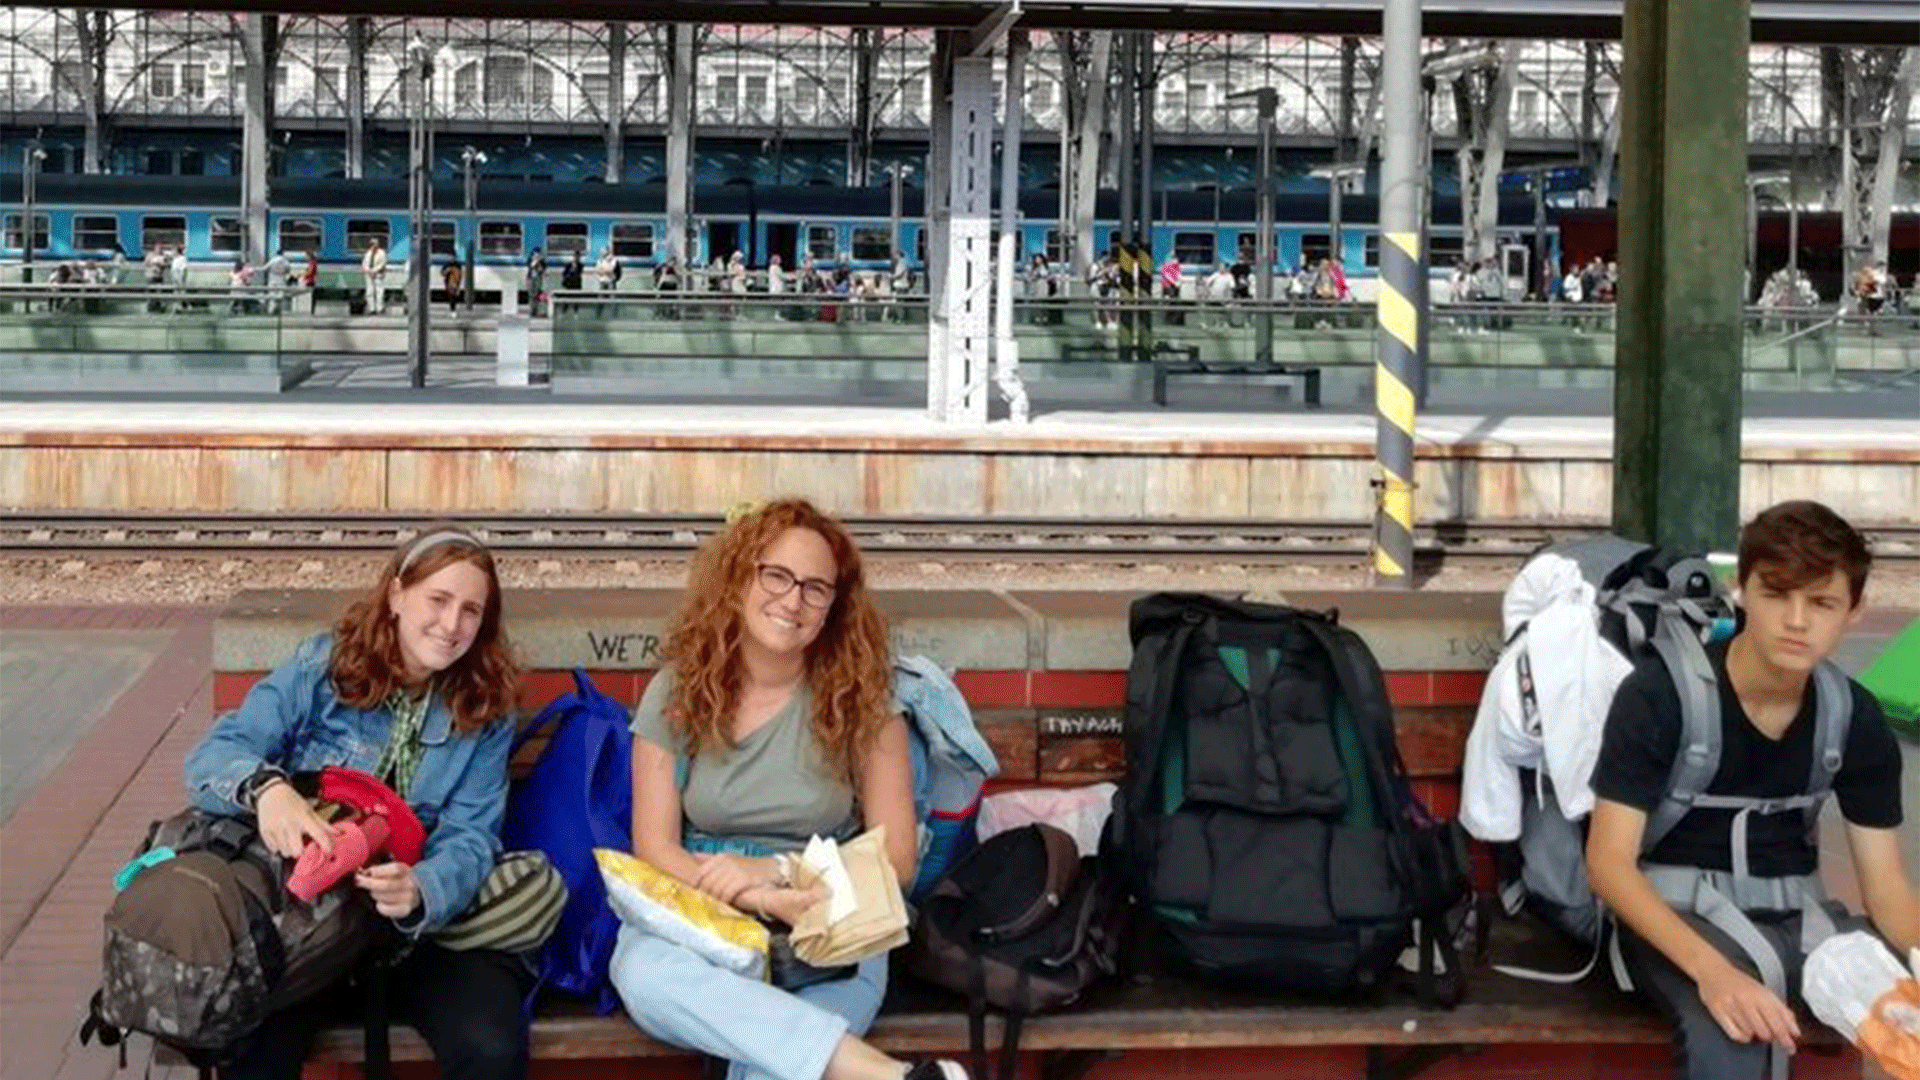 backpacking-family-train-station